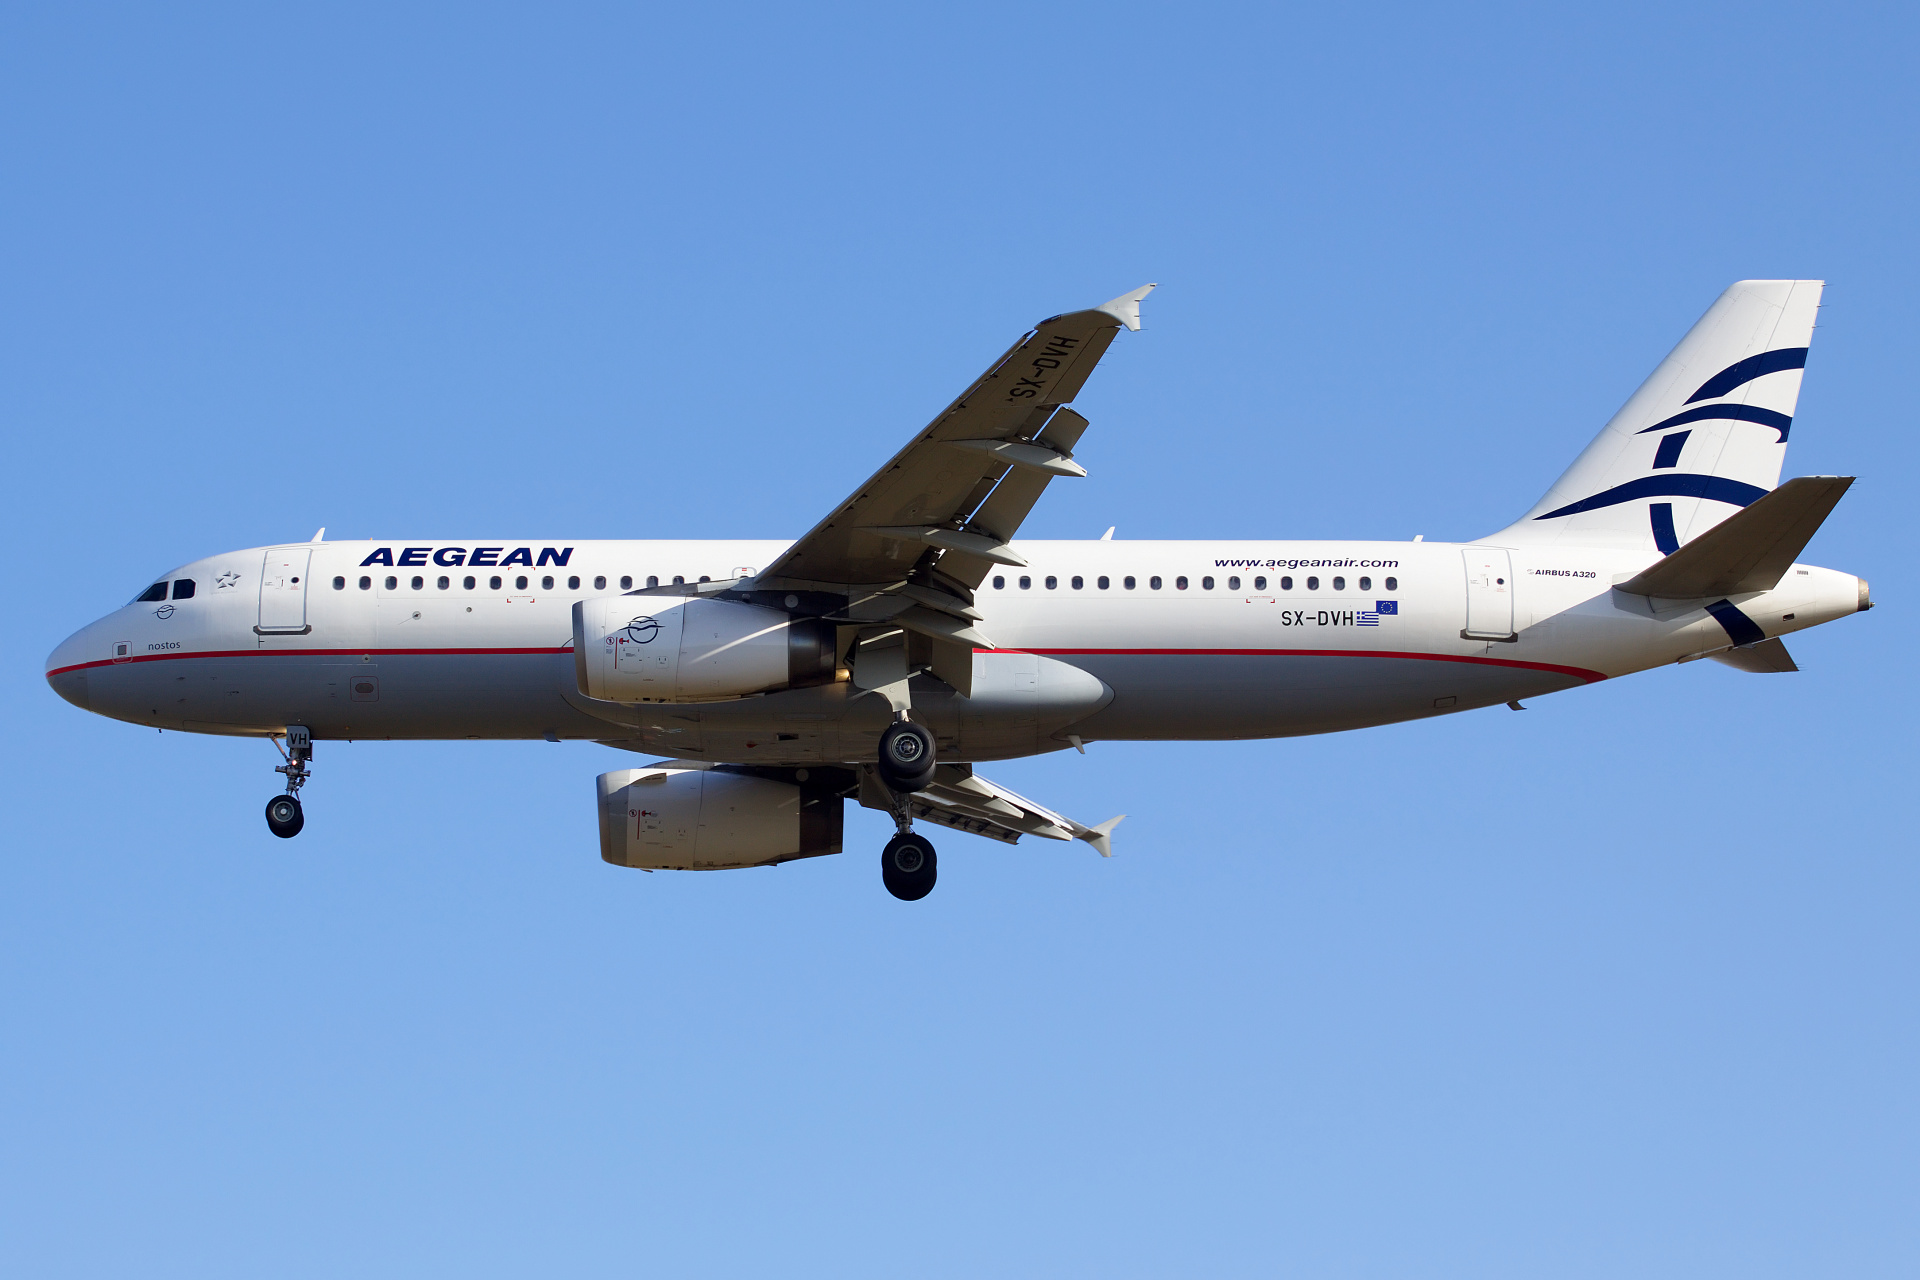 SX-DVH (Aircraft » EPWA Spotting » Airbus A320-200 » Aegean Airlines)